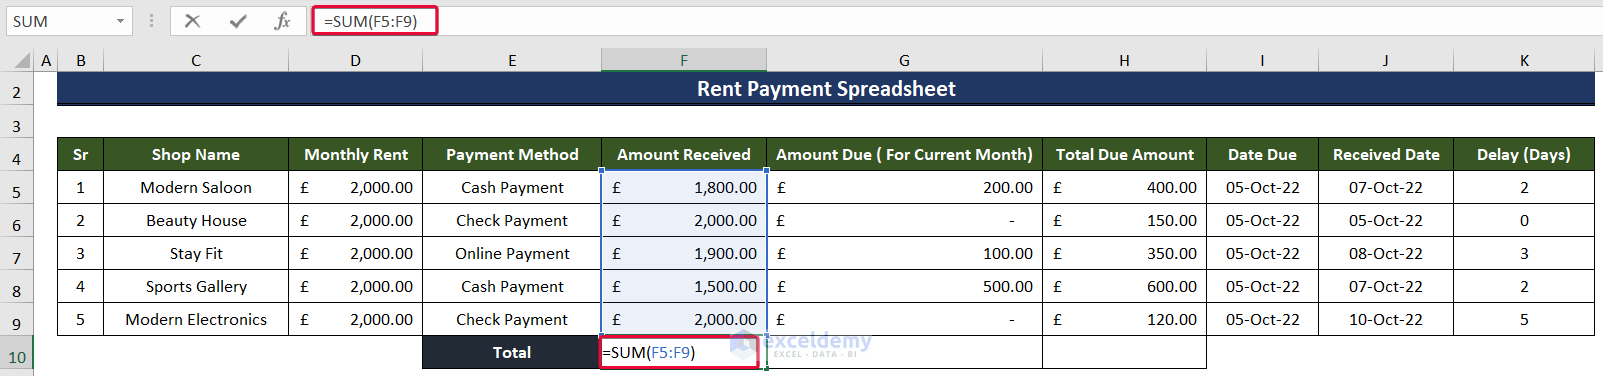 summing up the amount received to create a rent payment excel spreadsheet